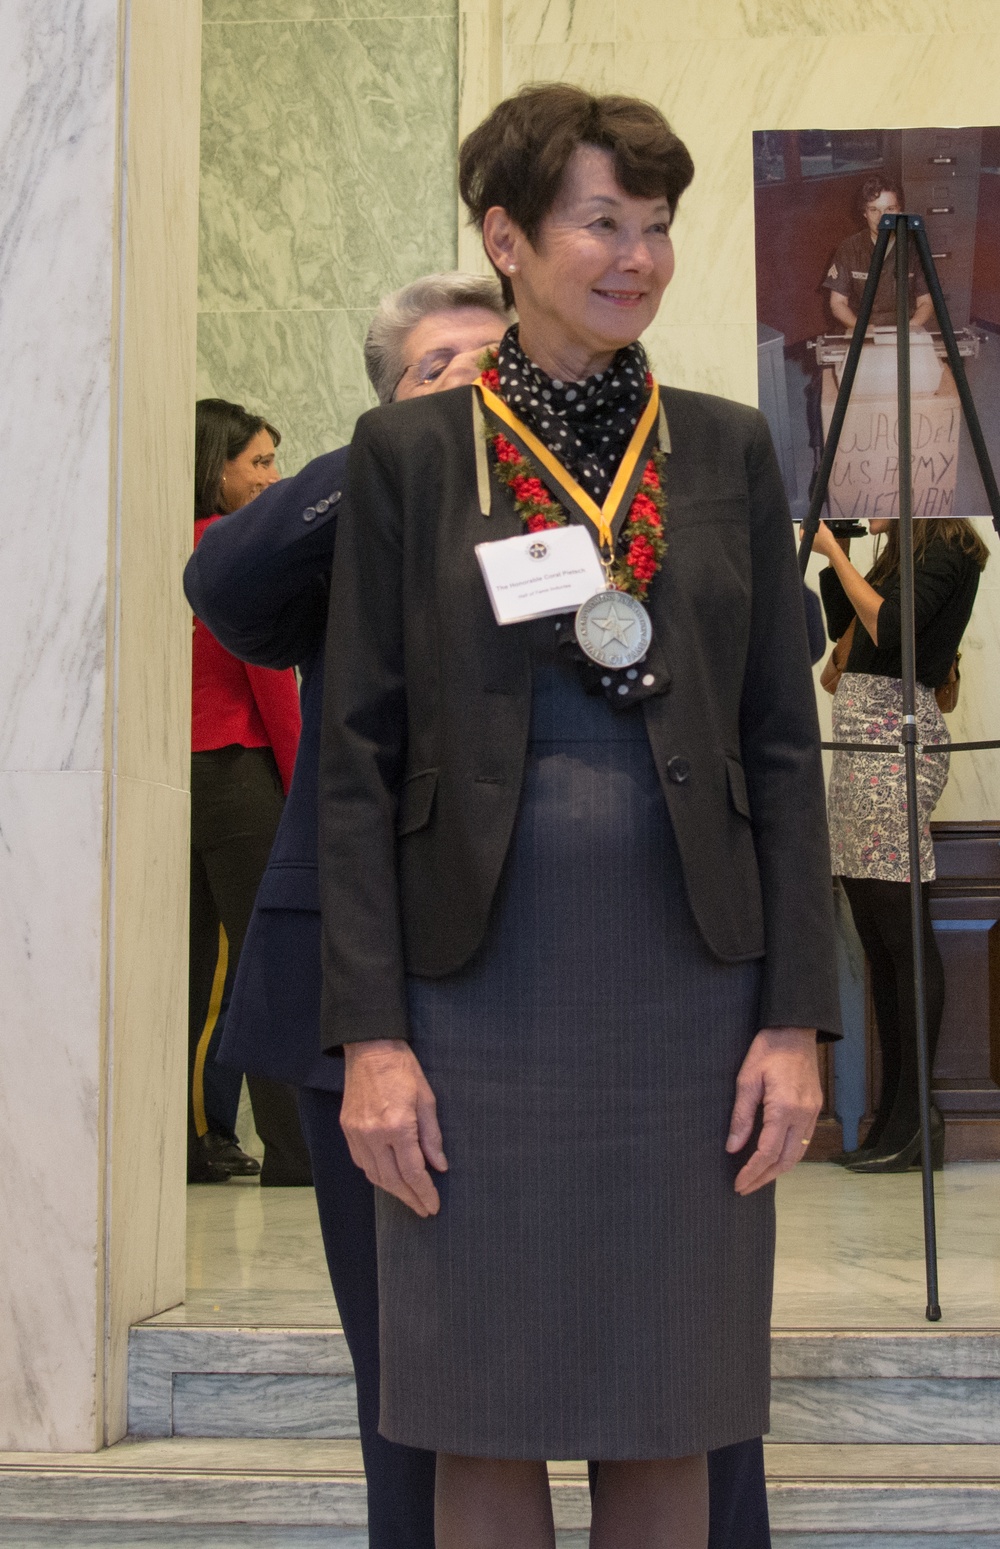 The Honorable Pietsch Receives Medal at Army Women's Hall of Fame Induction